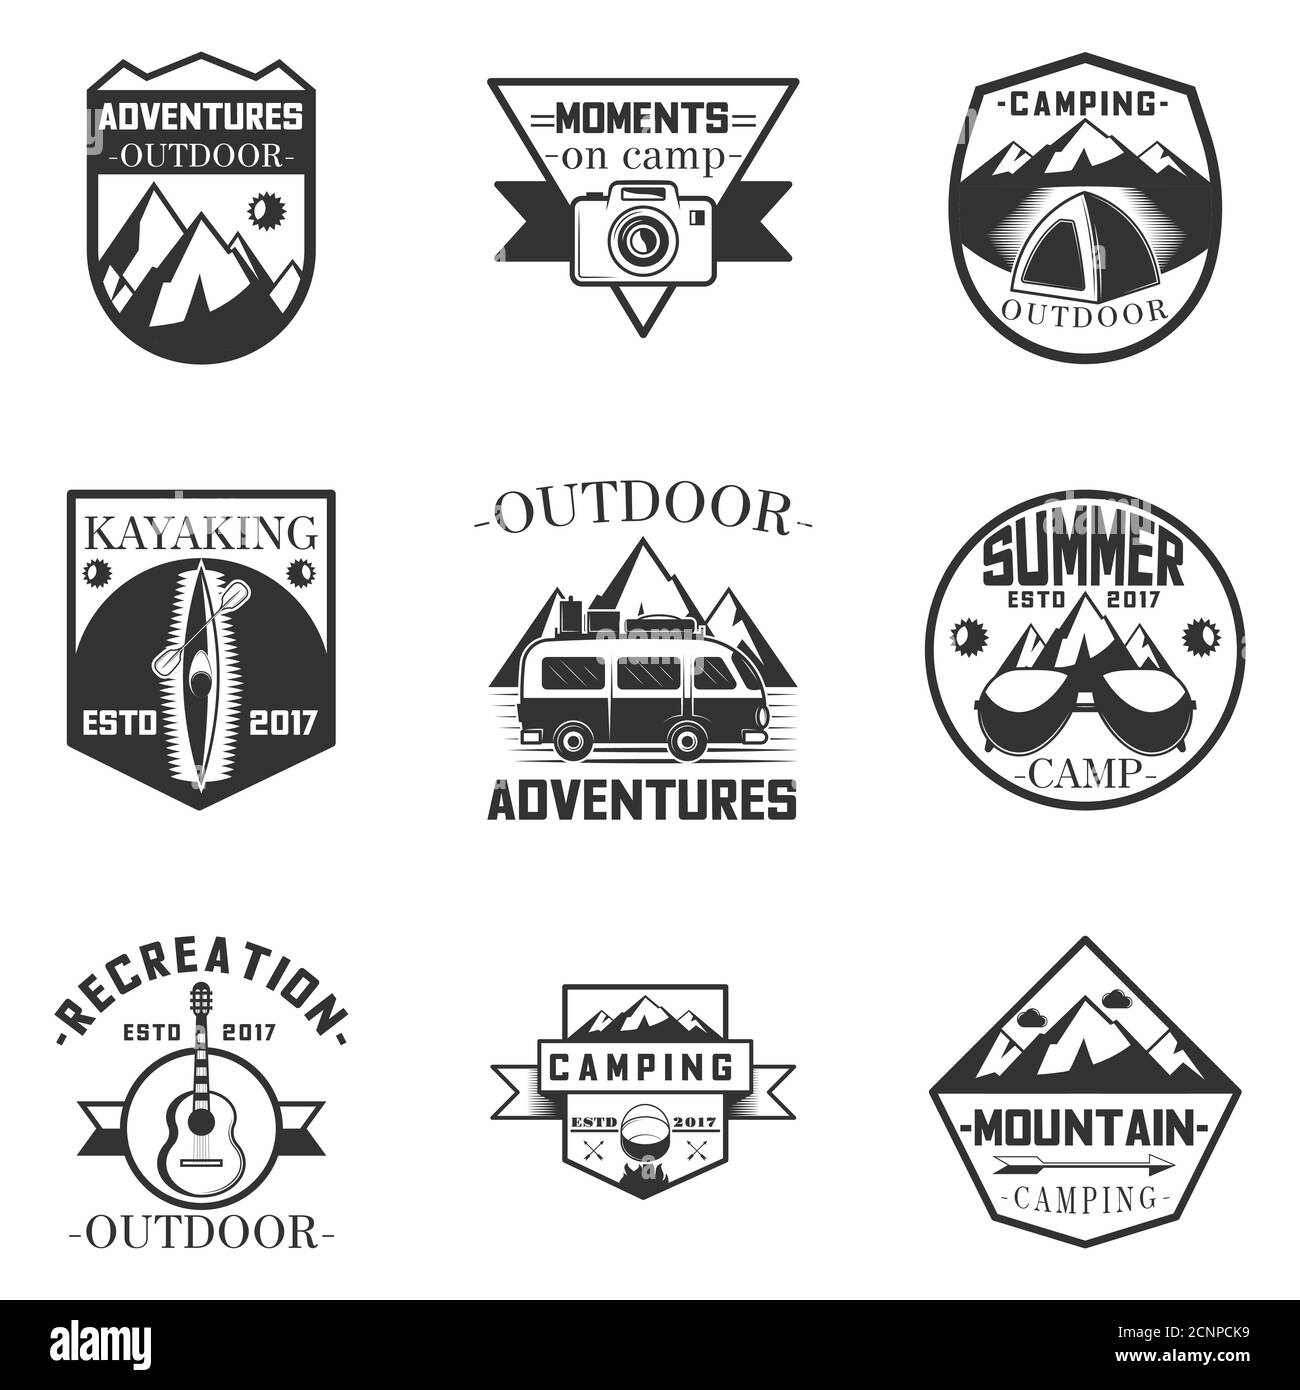 Vector set of outdoor activity, camping and expedition labels in vintage style. Design elements, icons, logo. Camp outdoor adventure illustration. Stock Vector